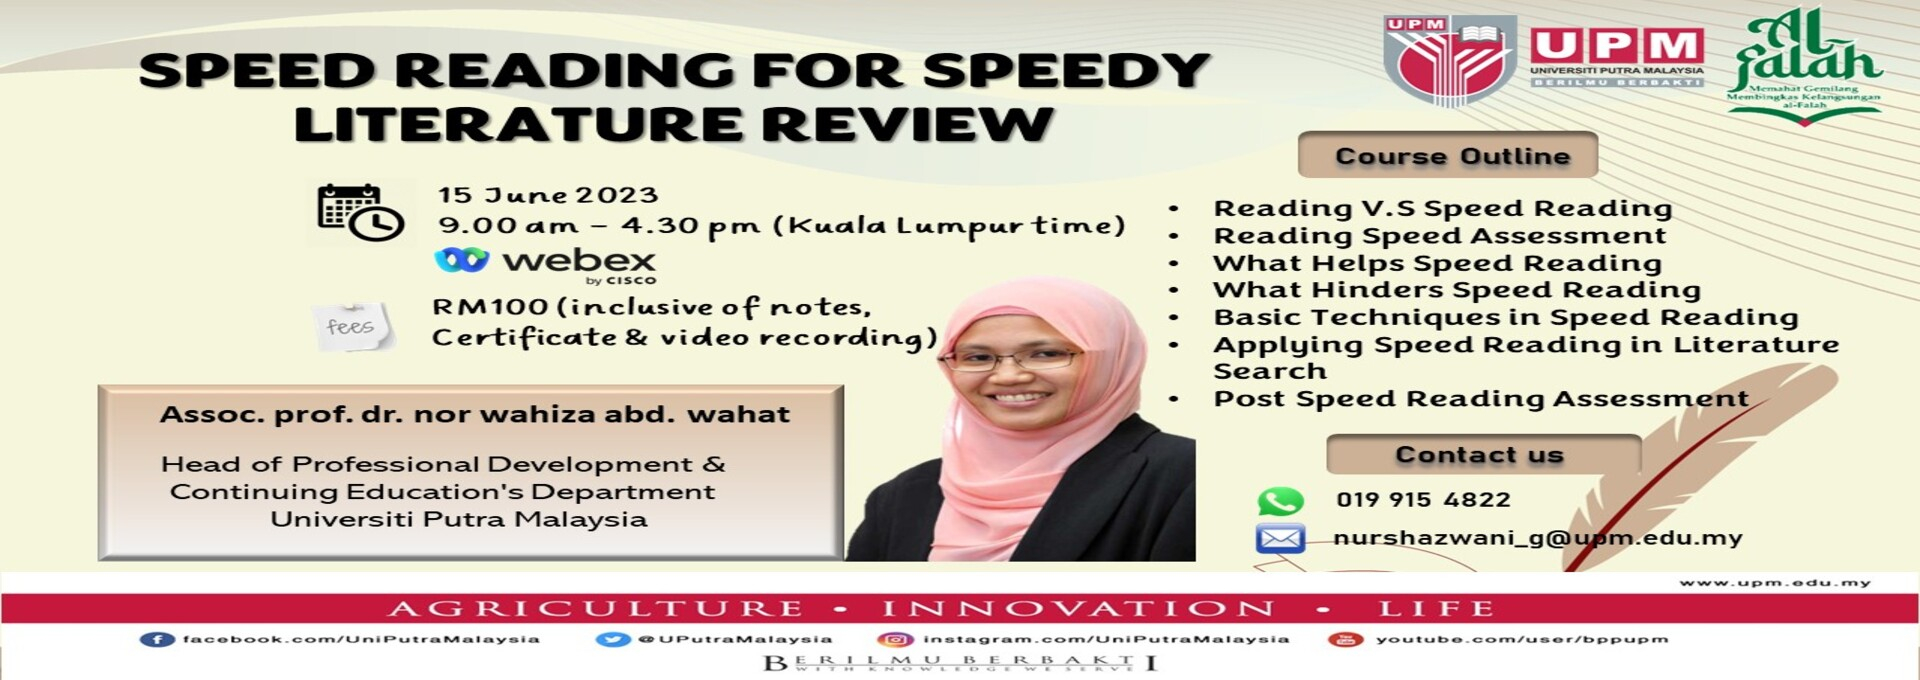 Speed Reading for Speedy Literature Review